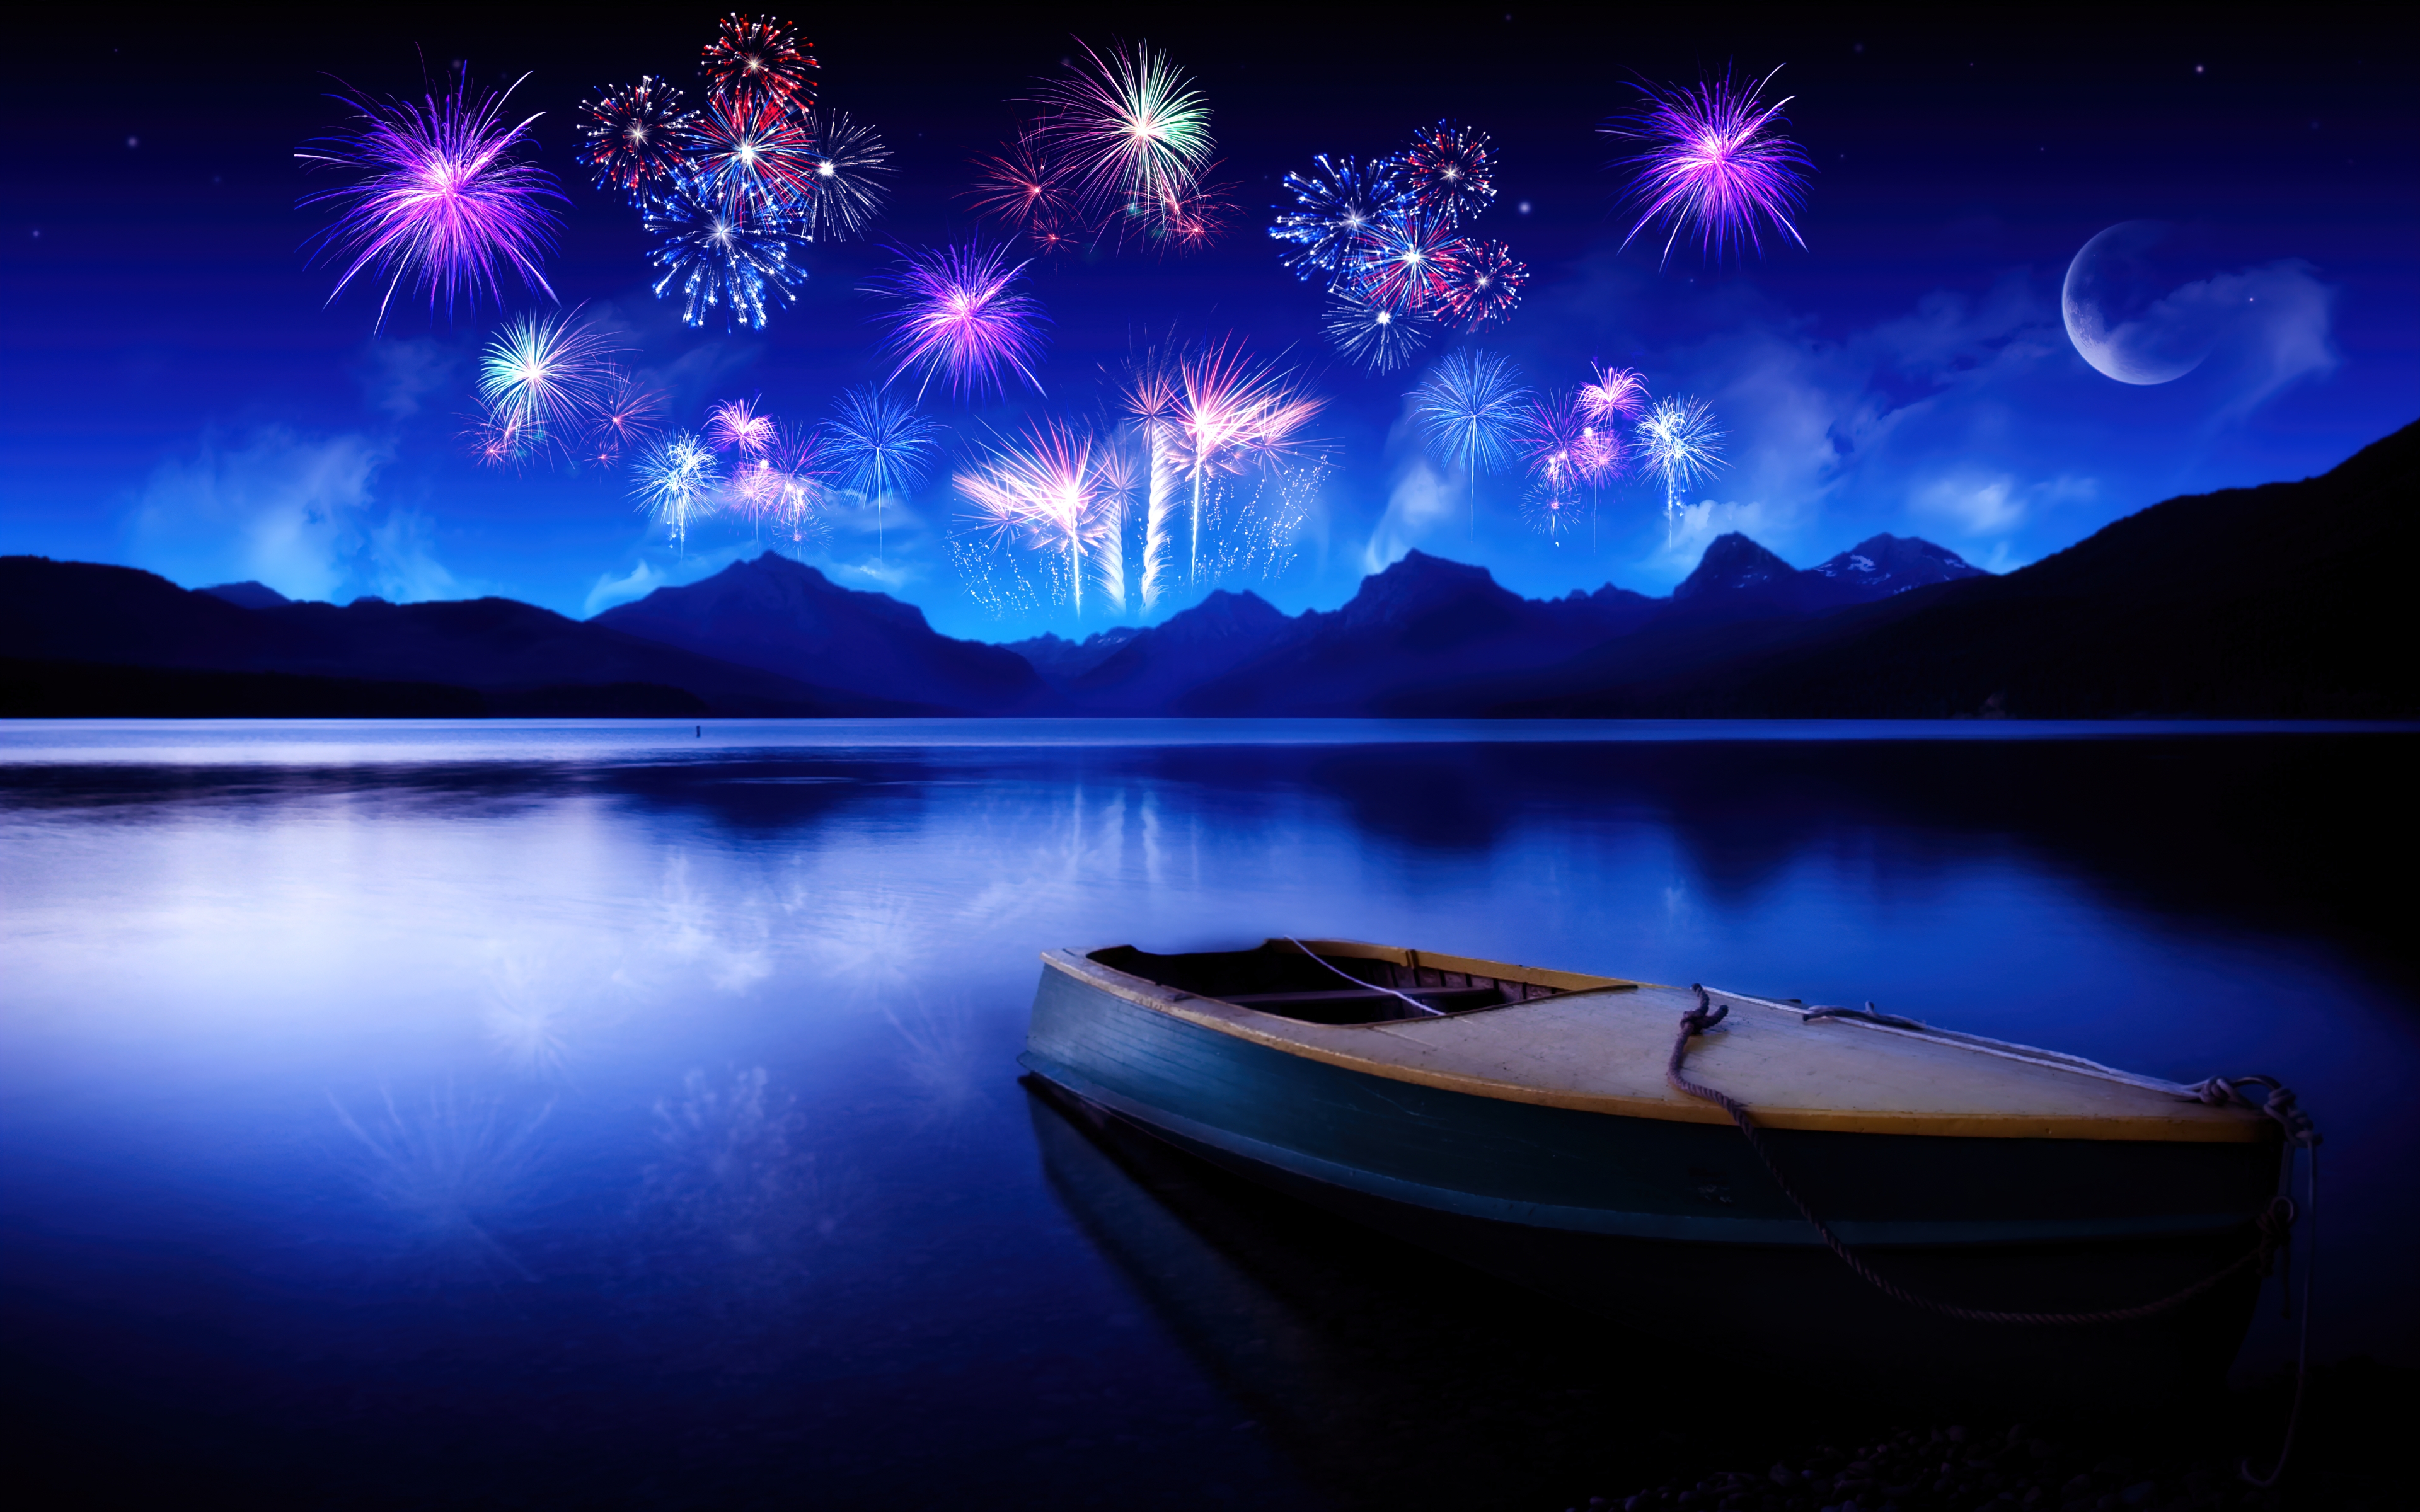 HD wallpaper, Lake, Fireworks, New Year, Crescent Moon, Night, Mountains, Boat, Reflections, New Year Celebrations, Blue